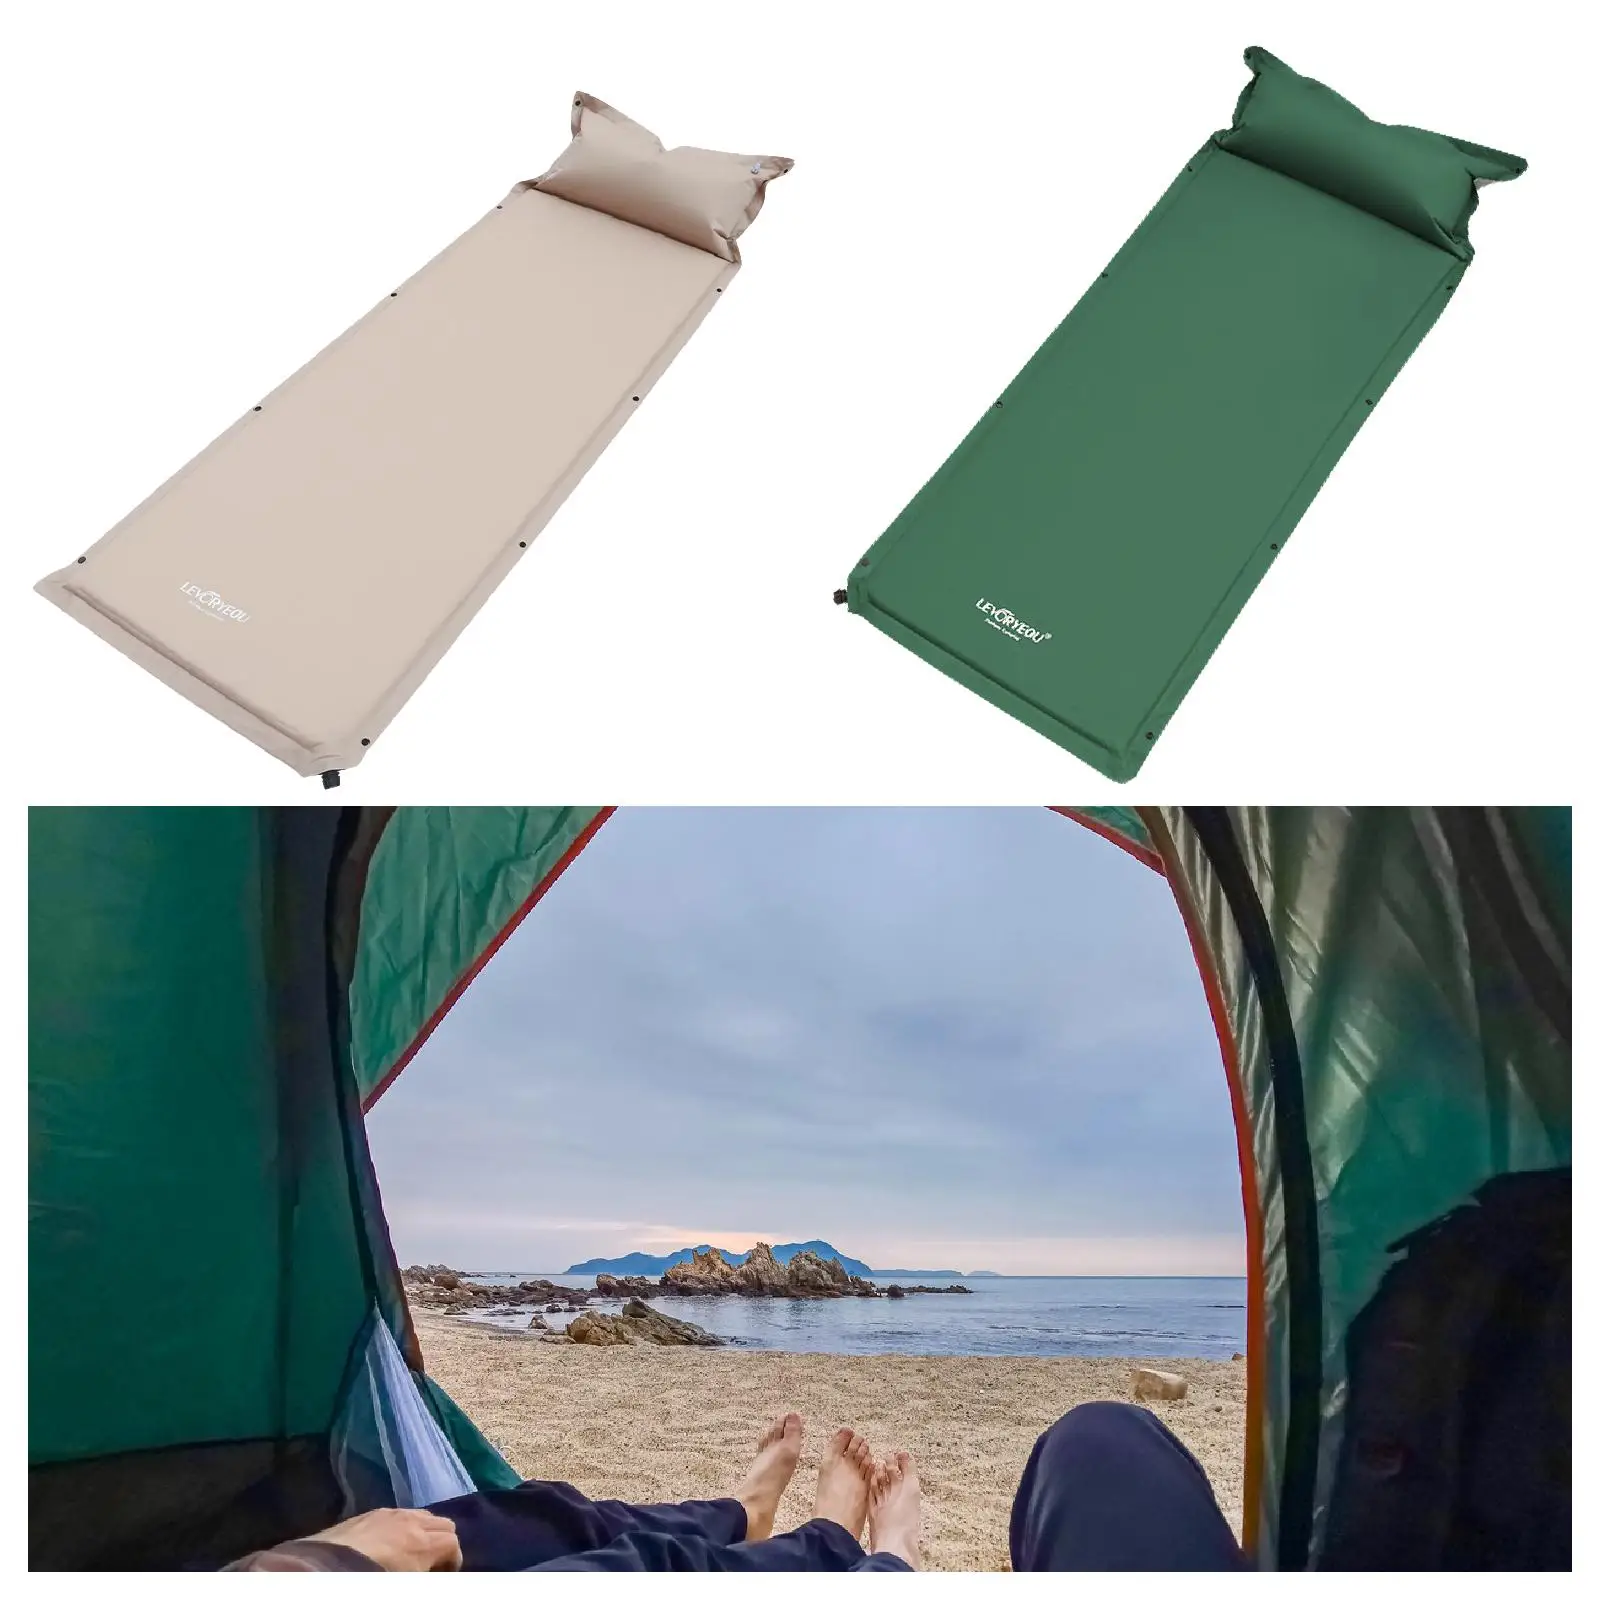 Inflating Mattress Inflatable Sleeping Mat Cushion Waterproof Foldable Outside Portable for Camping Balcony Backpacking Indoor